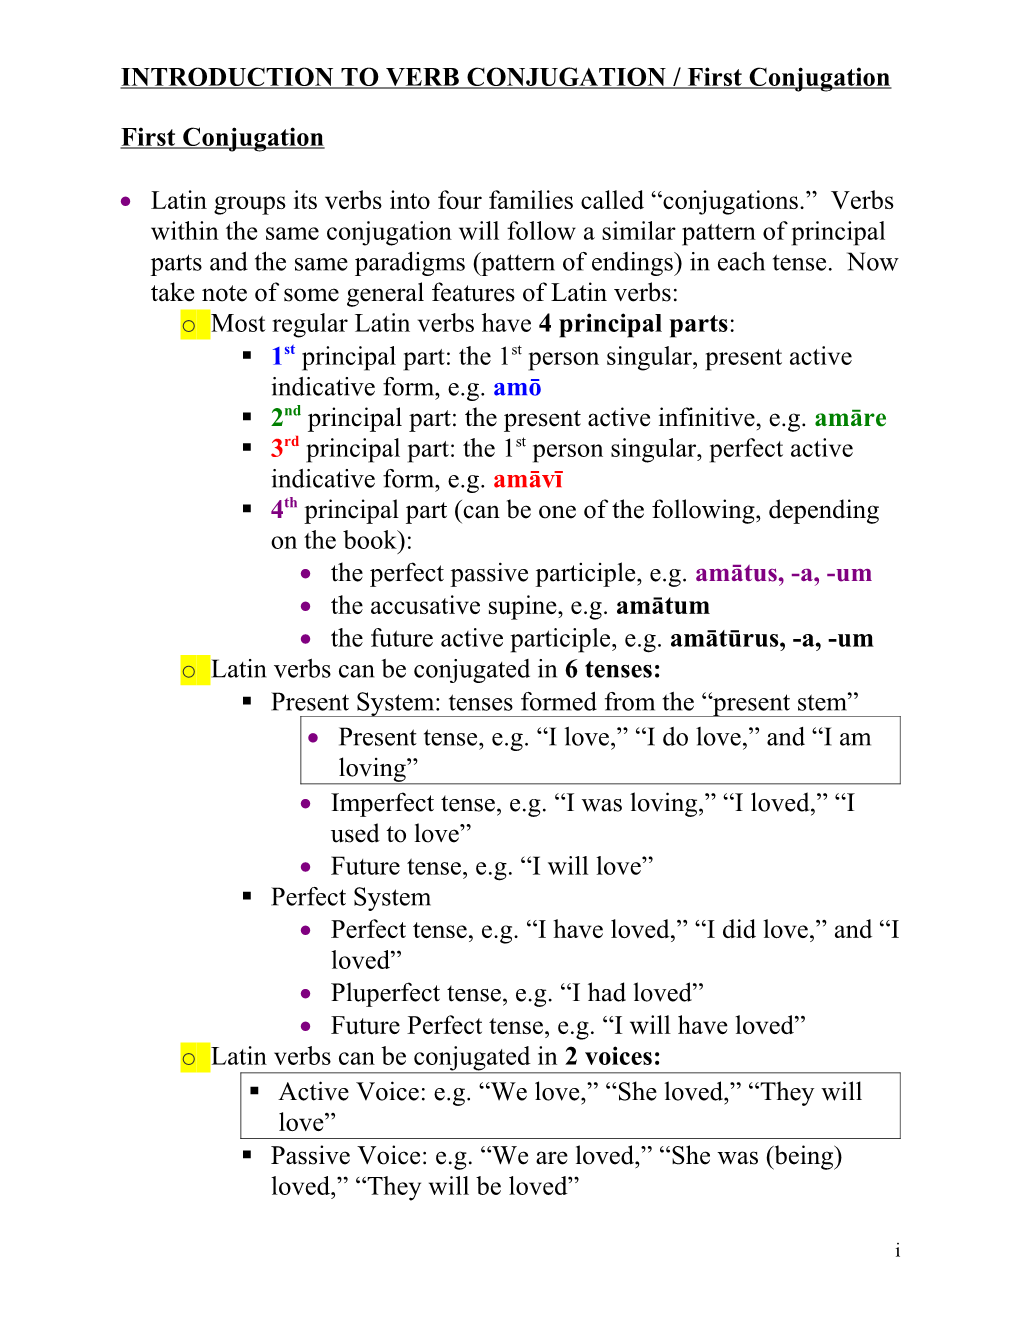 INTRODUCTION to VERB CONJUGATION / First Conjugation